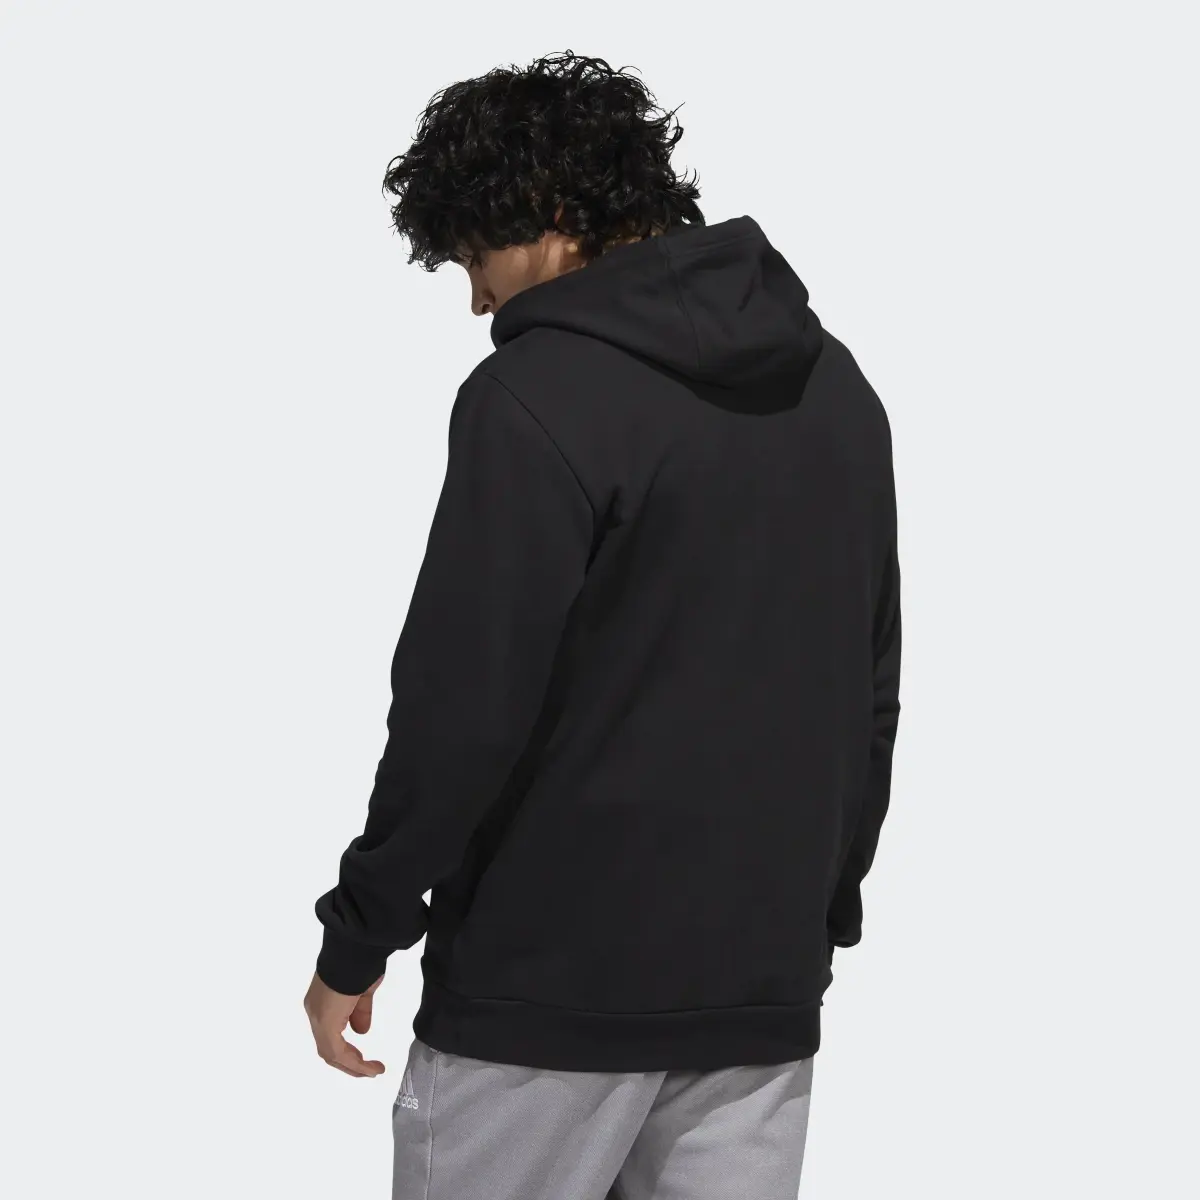 Adidas Embroidery Graphic Hoodie. 3